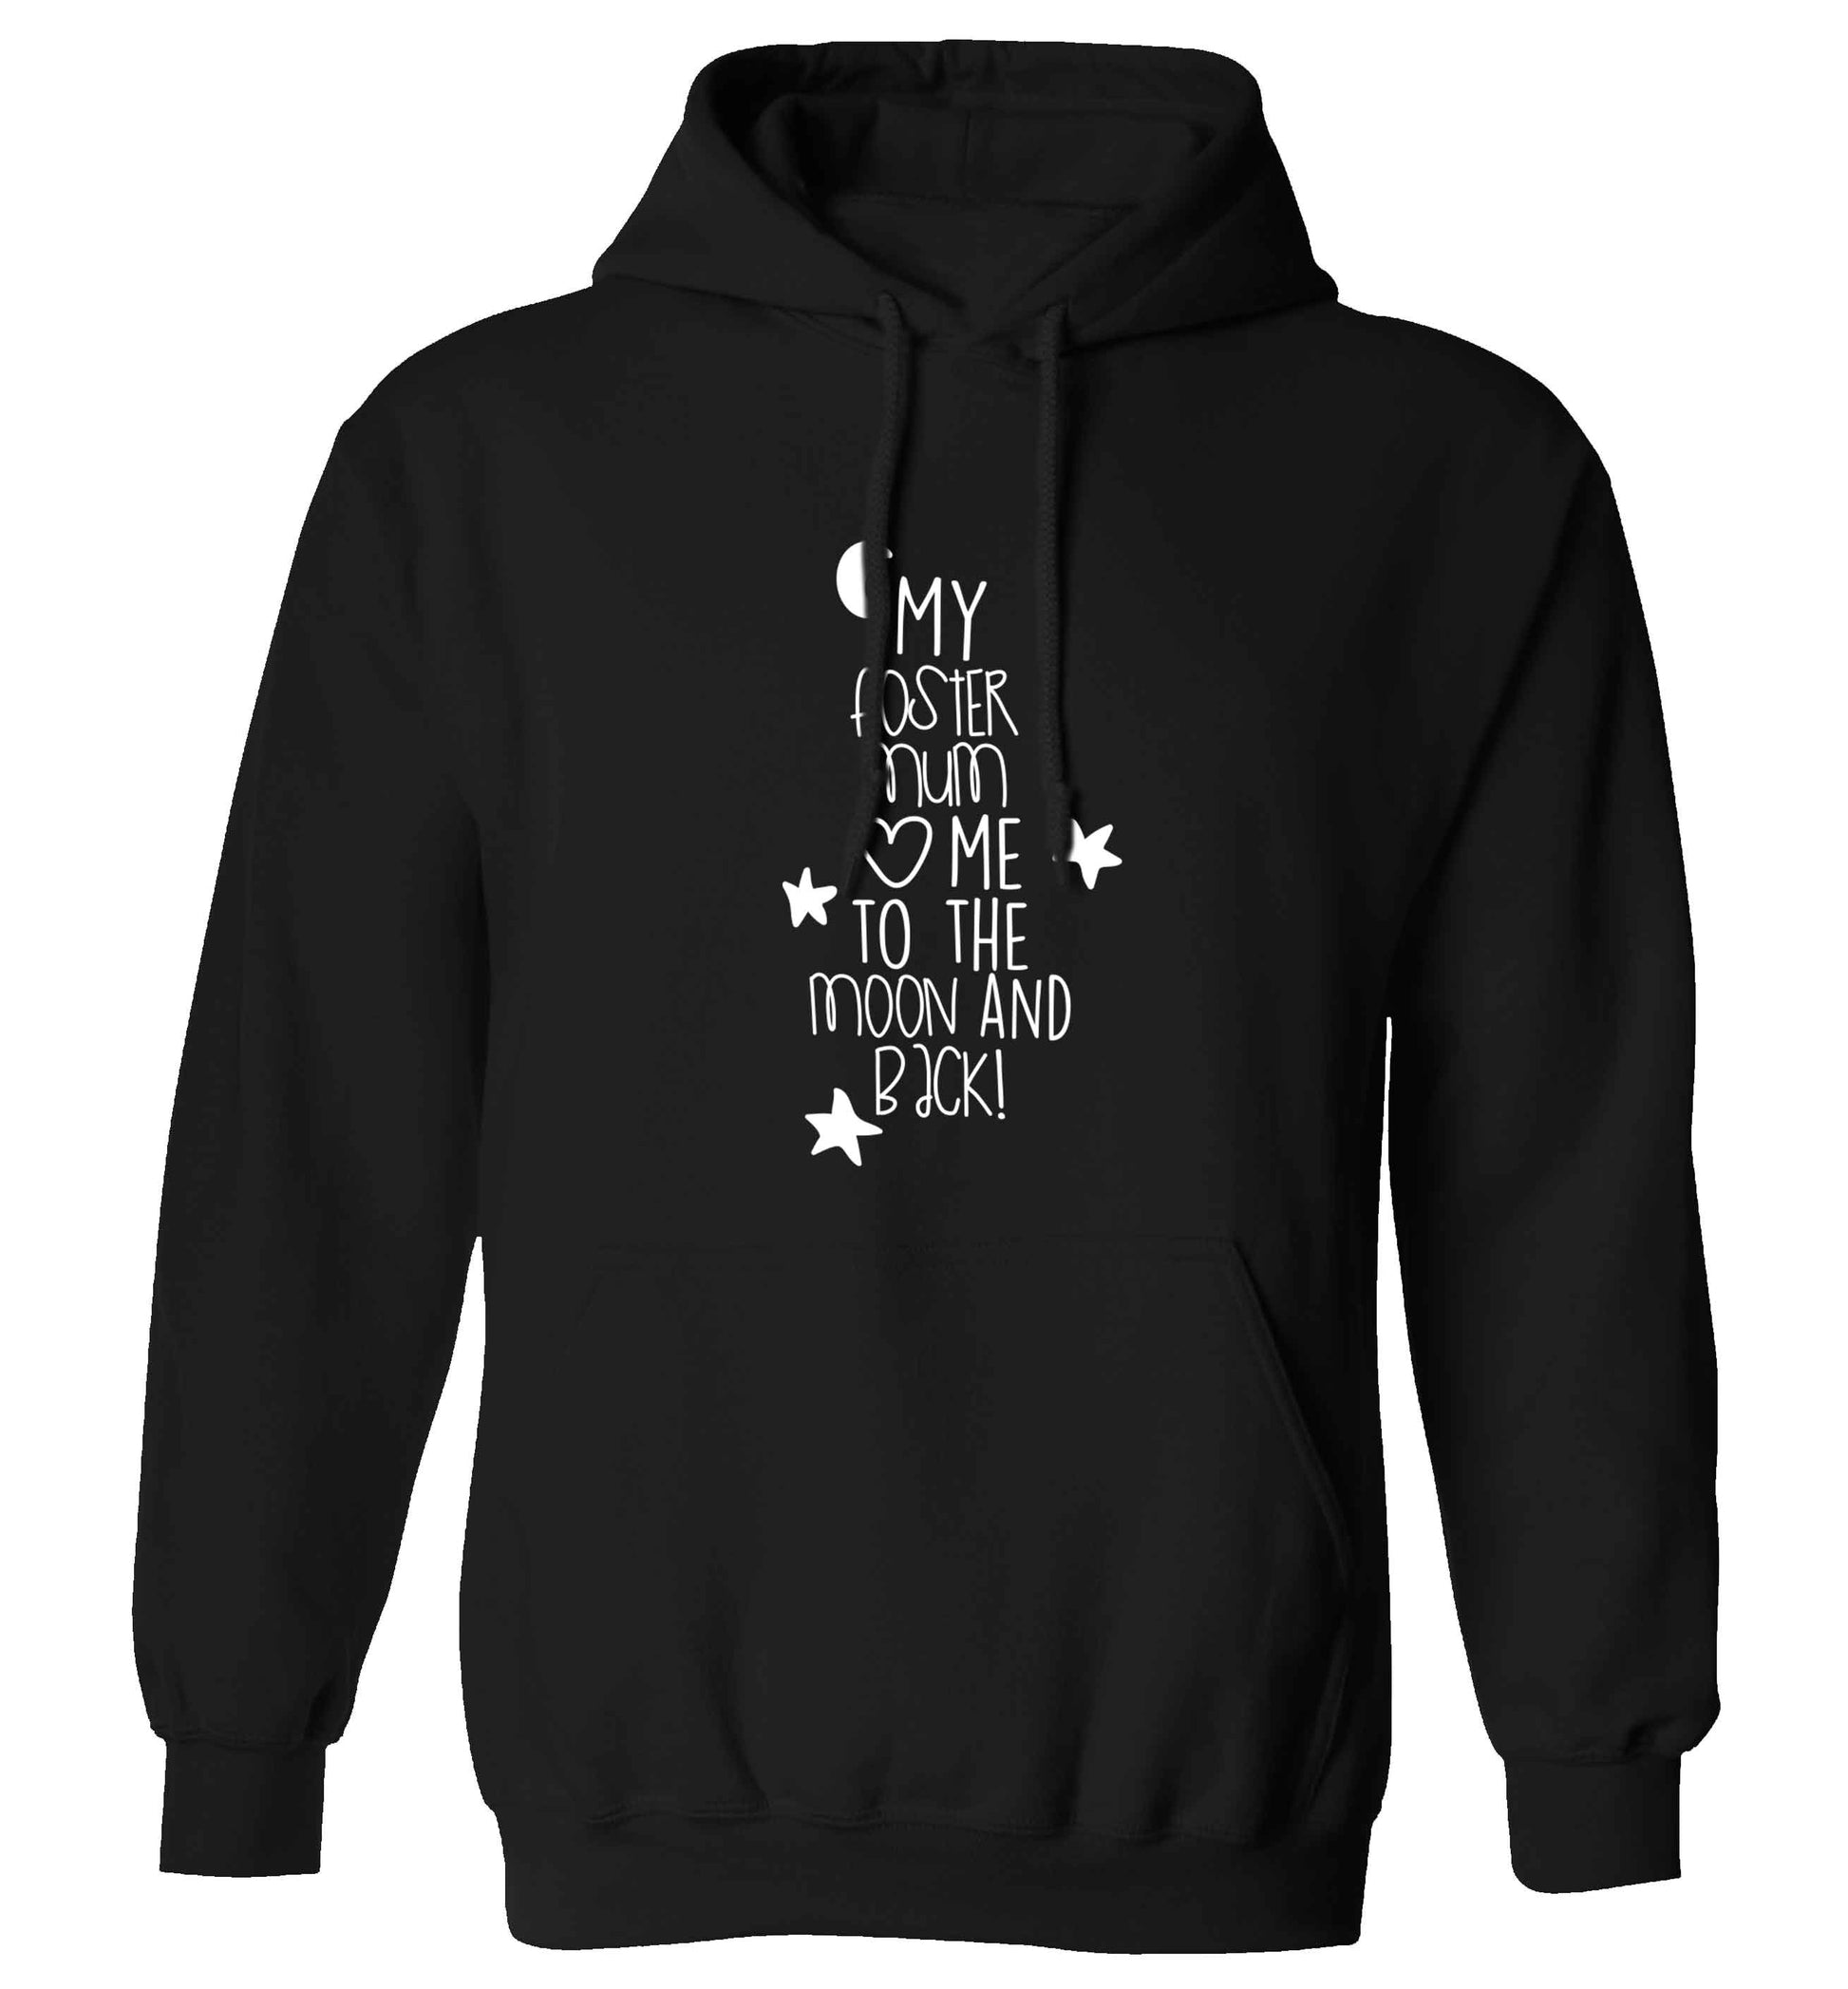 My foster mum loves me to the moon and back adults unisex black hoodie 2XL